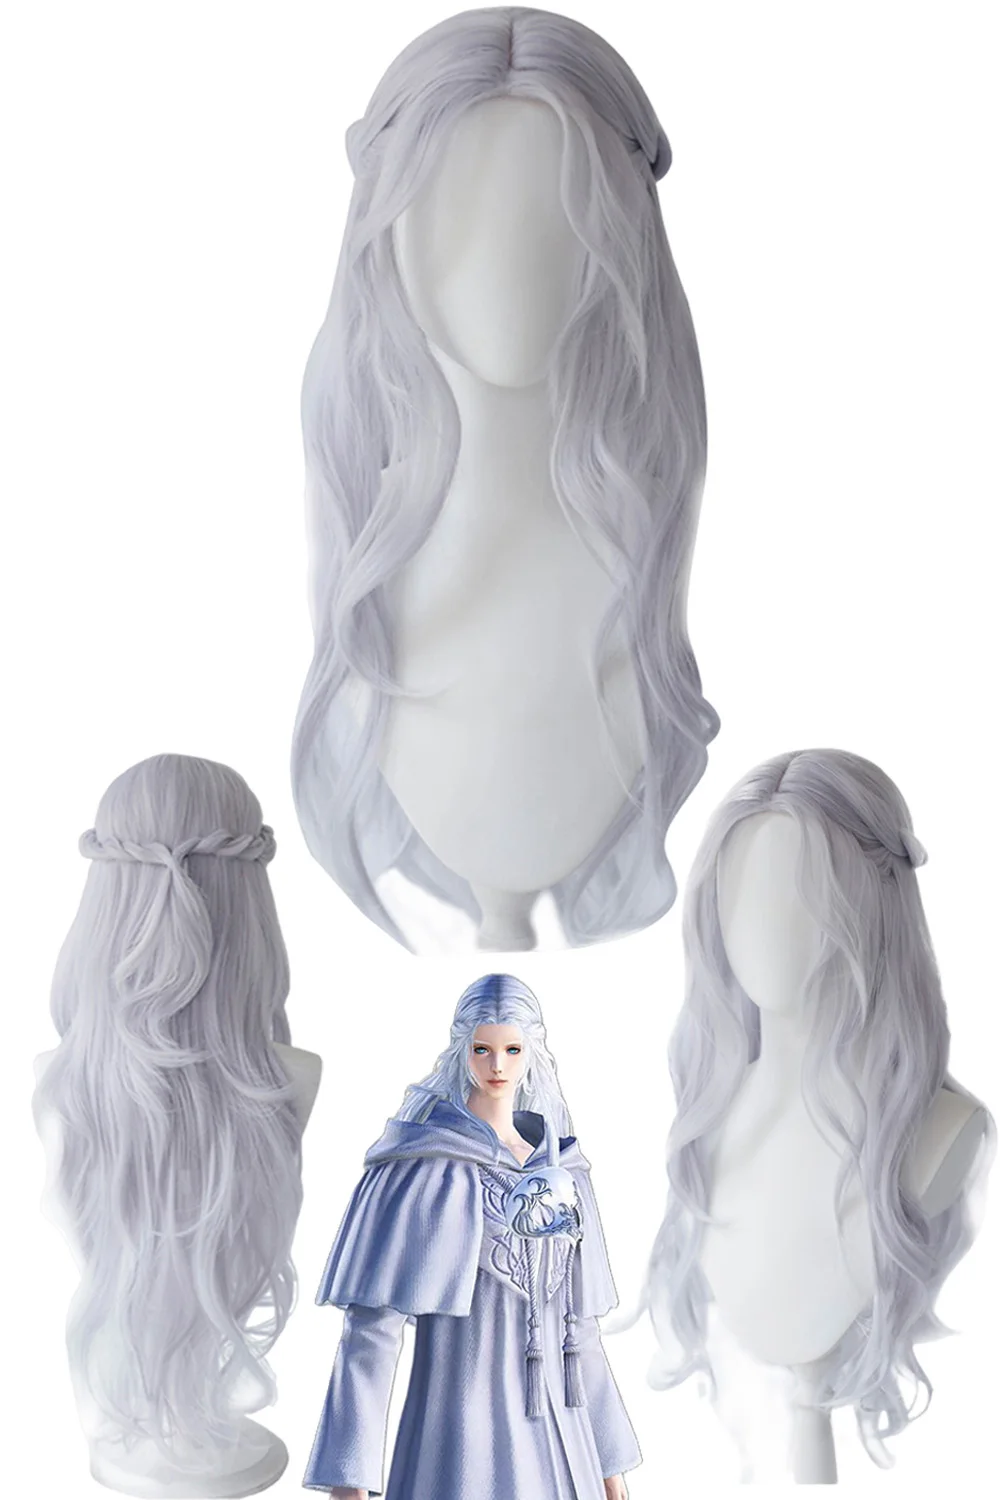 

Venat Cosplay Wigs Game Final Fantasy XIV Fantasy Sliver Long Wig Outfits Costume Accessories Women Roleplay Halloween Suit Prop